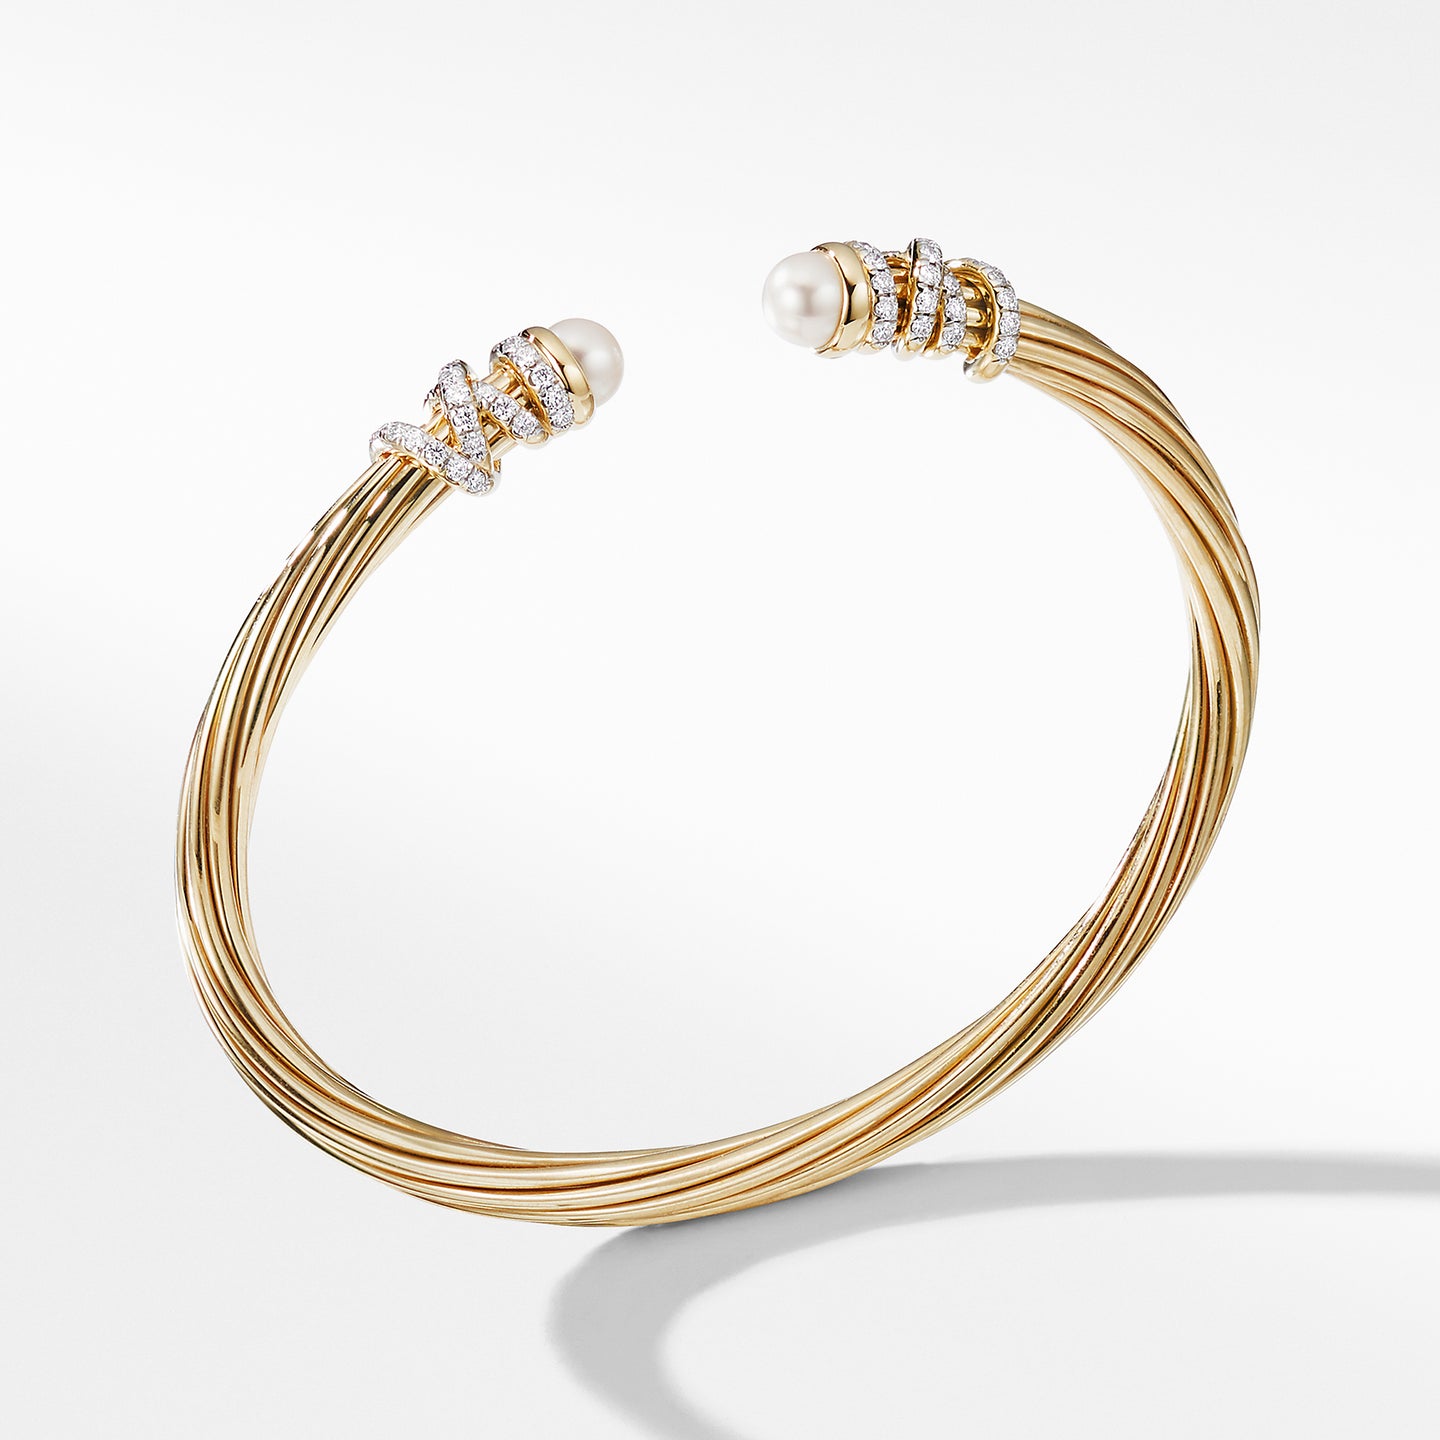 Helena End Station Bracelet in 18K Yellow Gold with Pearls and Diamonds, Size Medium